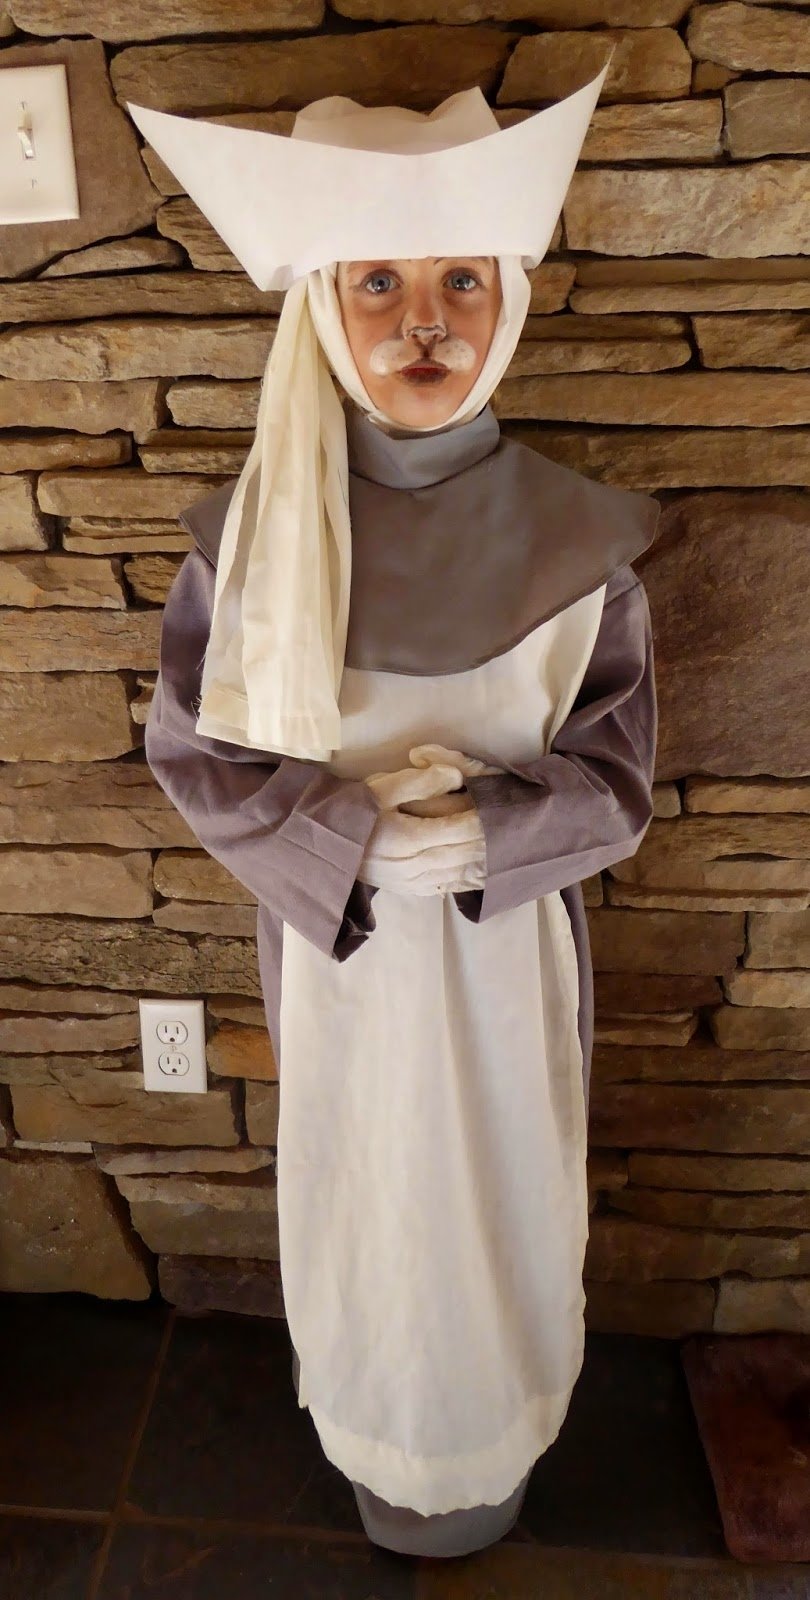 10 Unique Dr Who Halloween Costume Ideas handmade sister of plenitude costume w hat template doctorwho 2022